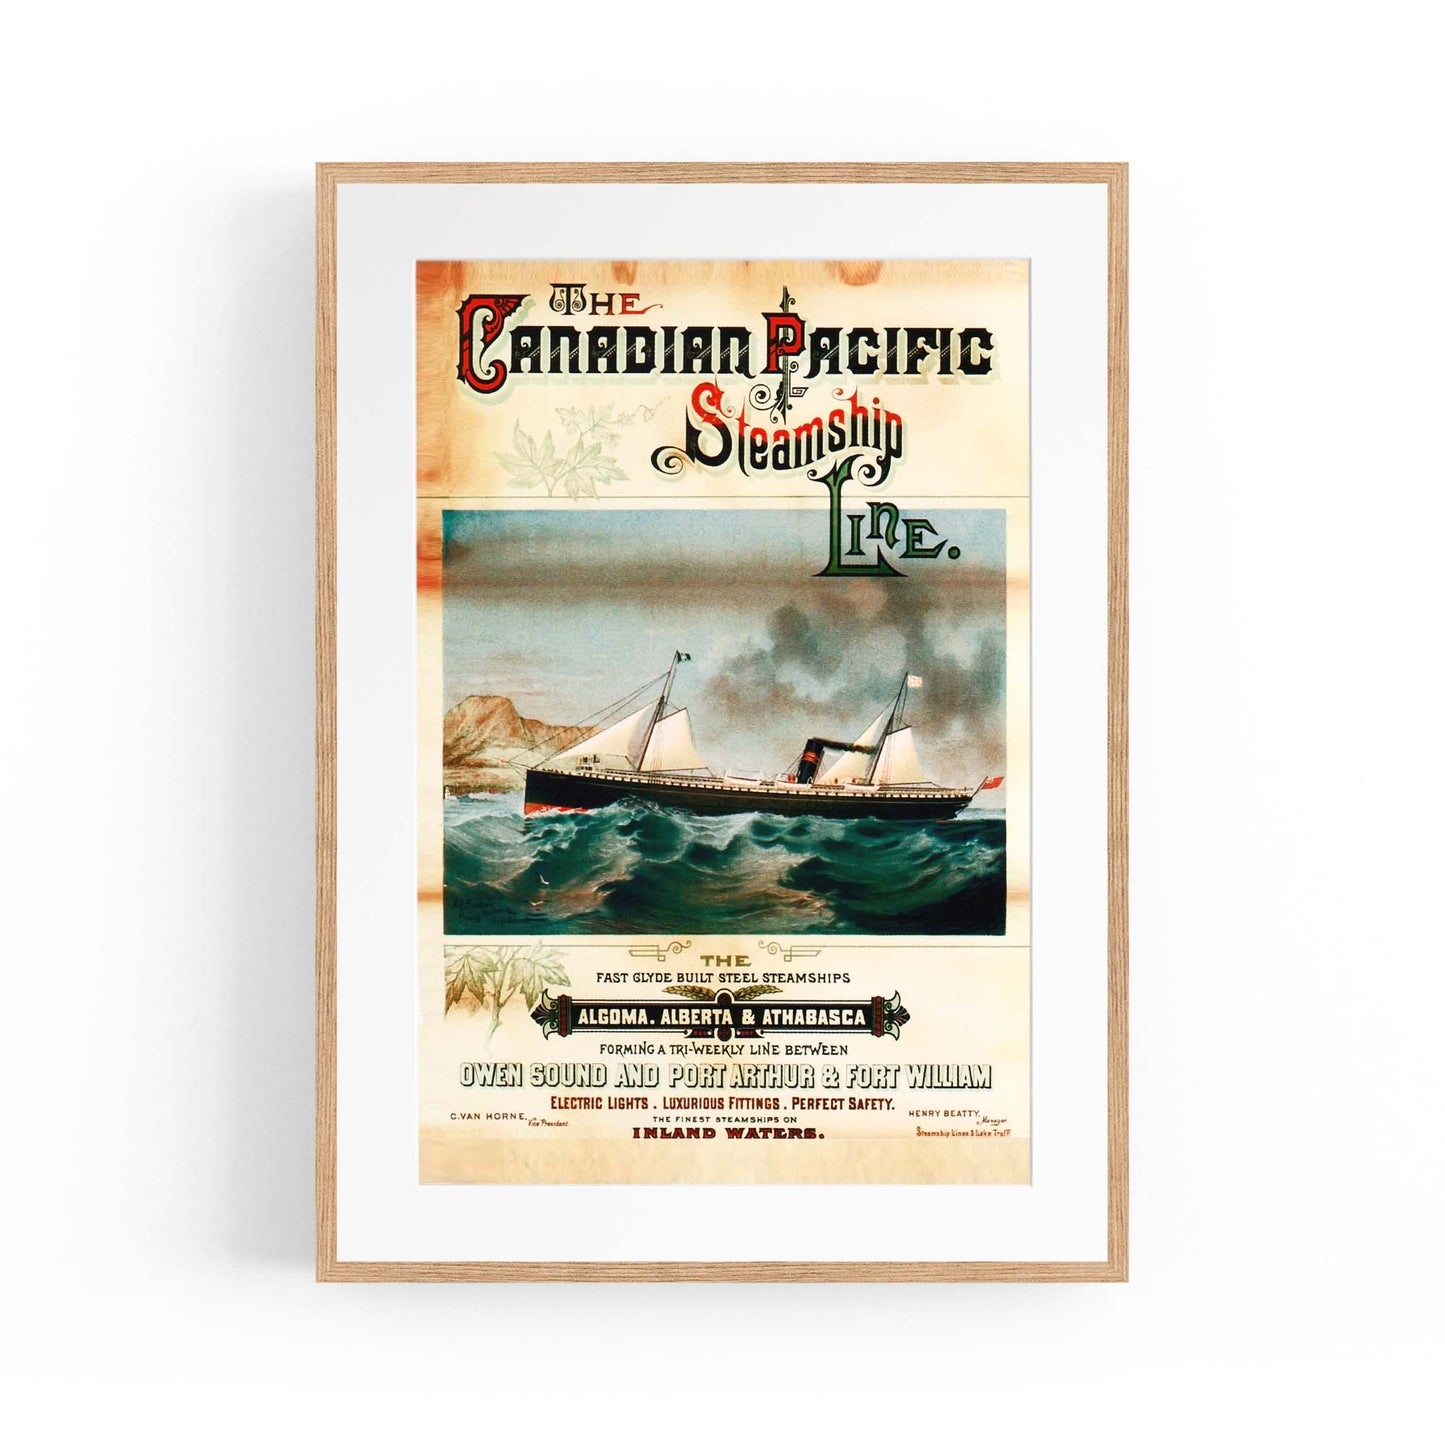 Canadian Pacific Vintage Shipping Advert Wall Art #8 - The Affordable Art Company